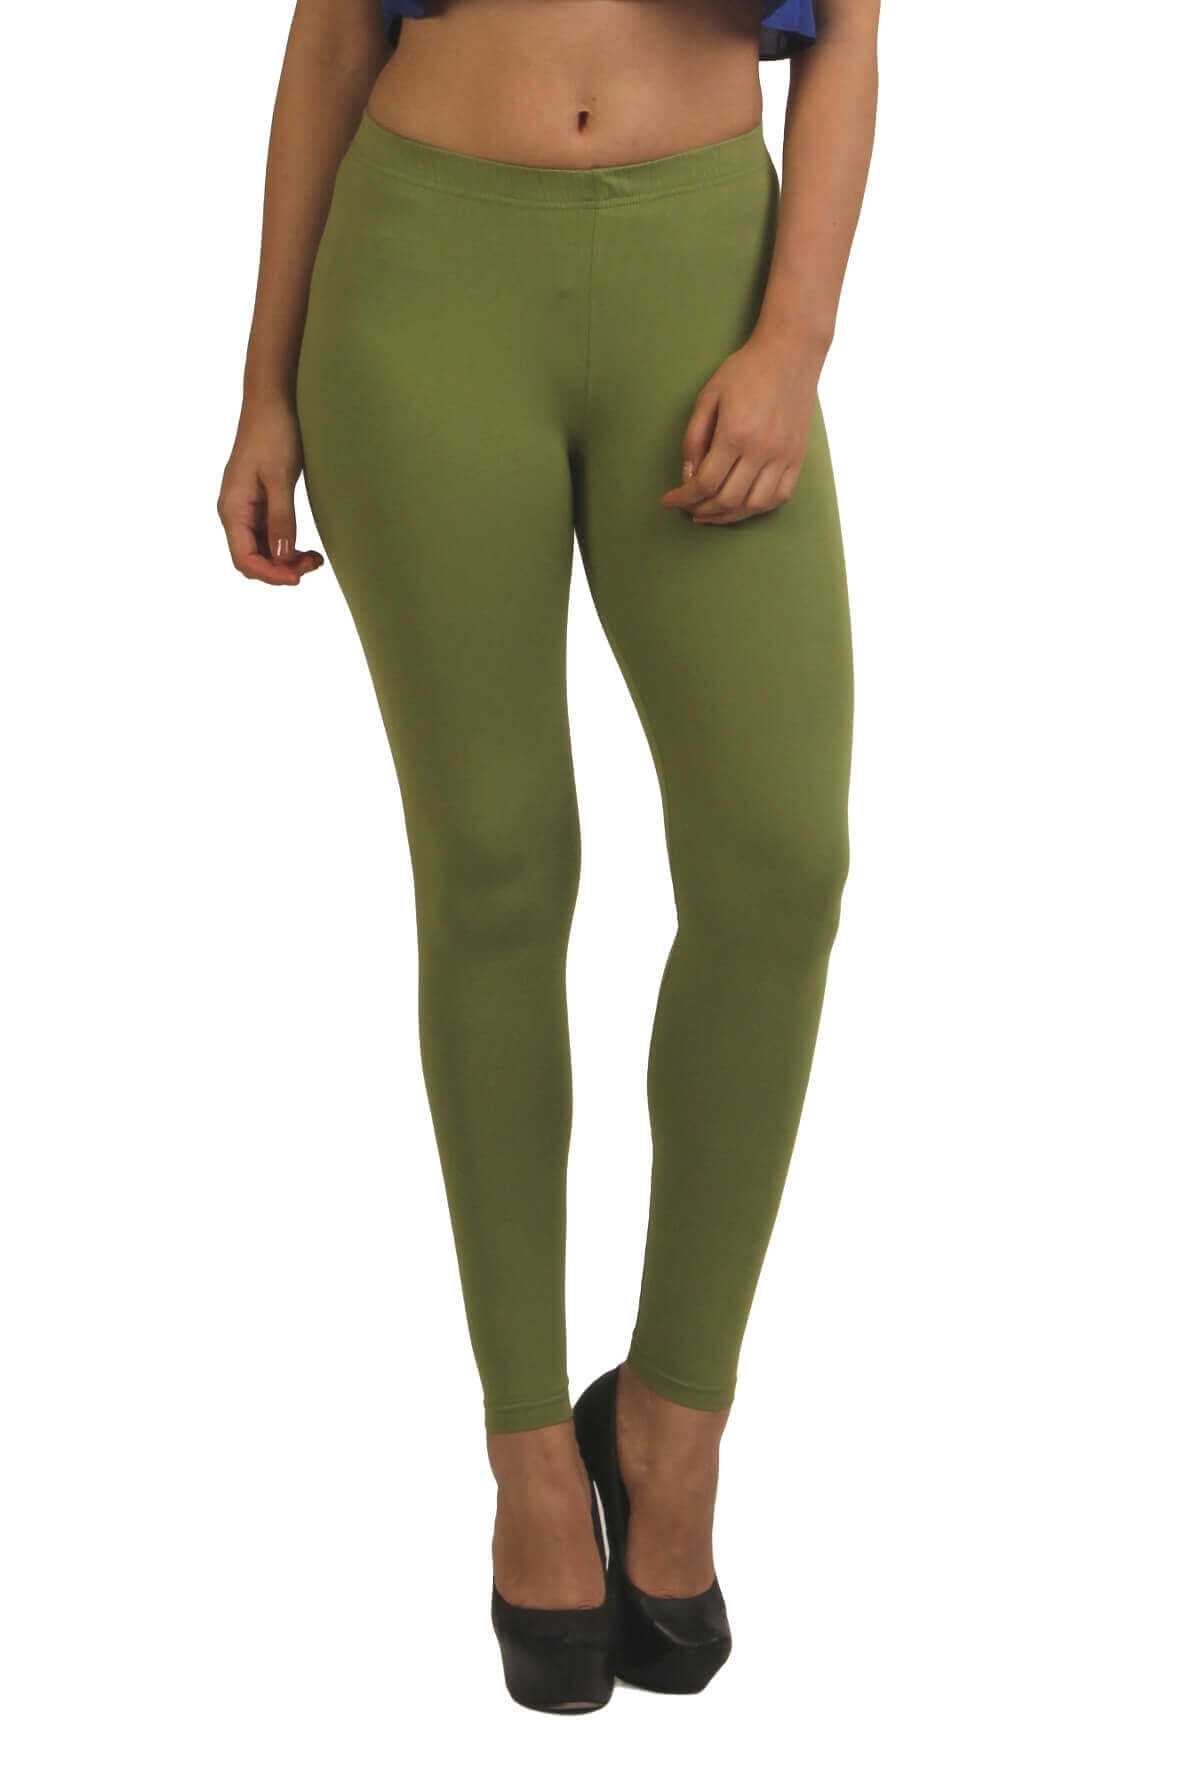 Buy TCG Comfortable 100% Cotton base Lycra Parrot Green & Pink Color  Leggings Set_GL04PGM Online at Low Prices in India - Paytmmall.com